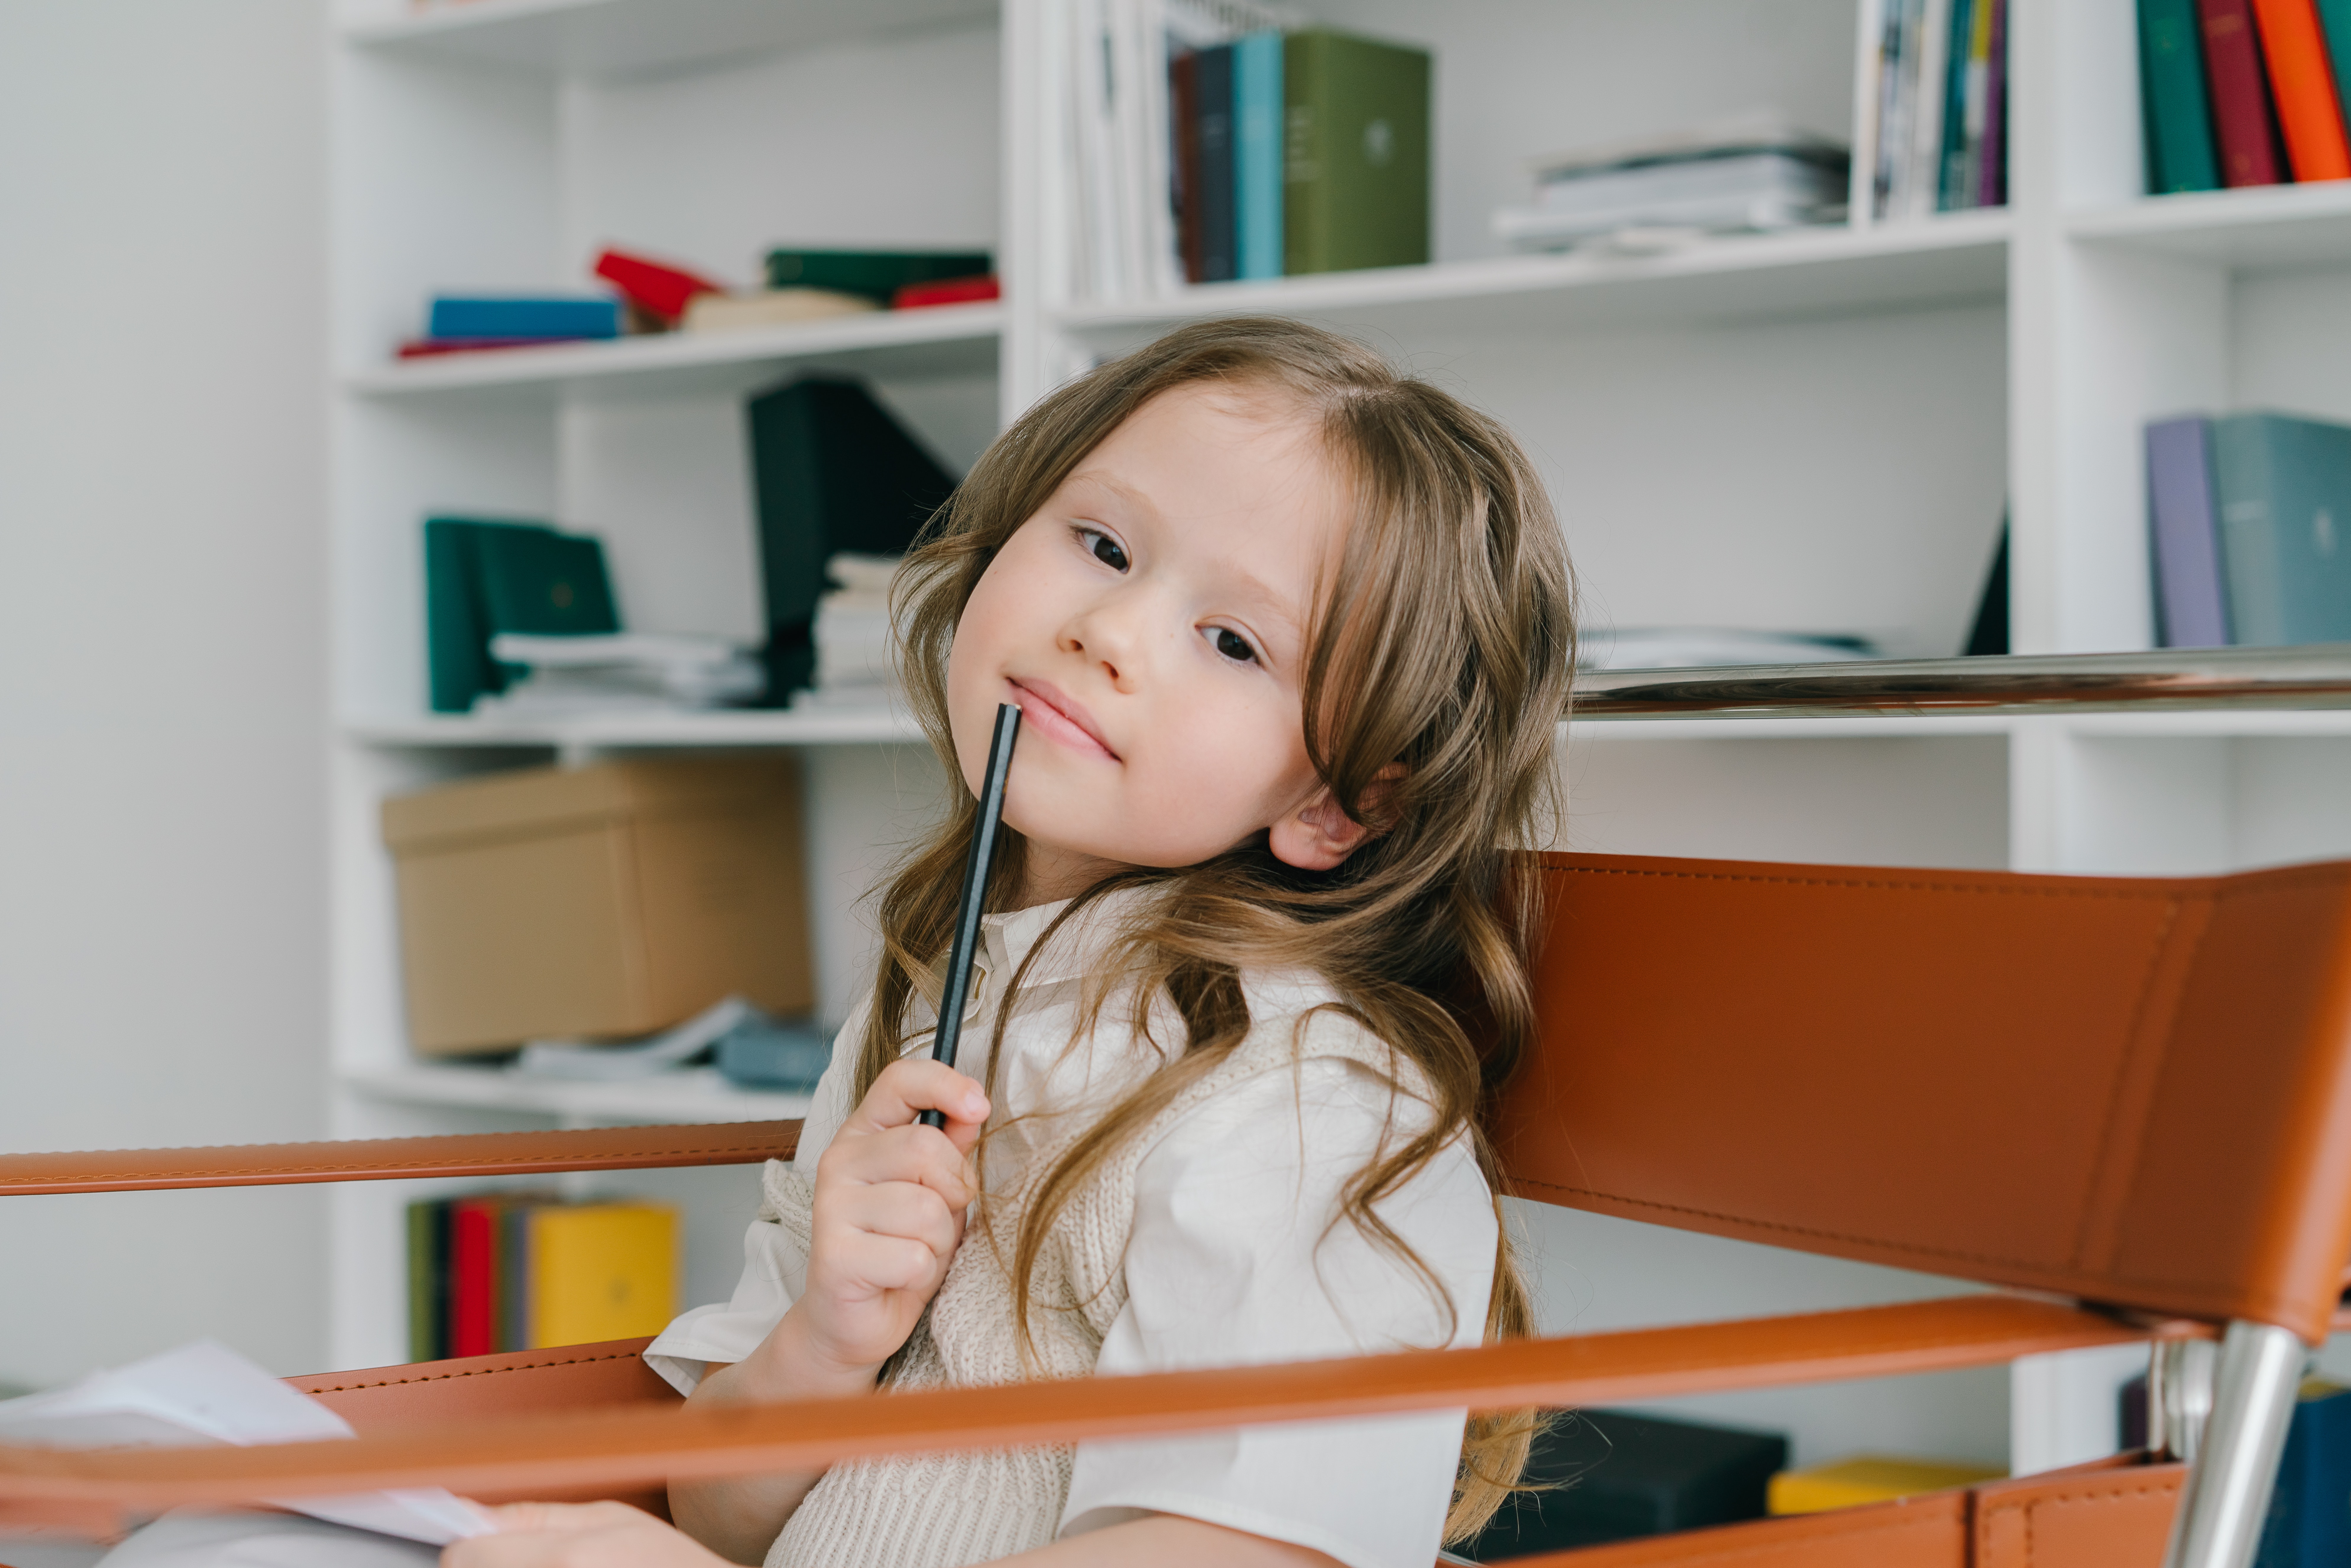 A female child holding a pen while thinking